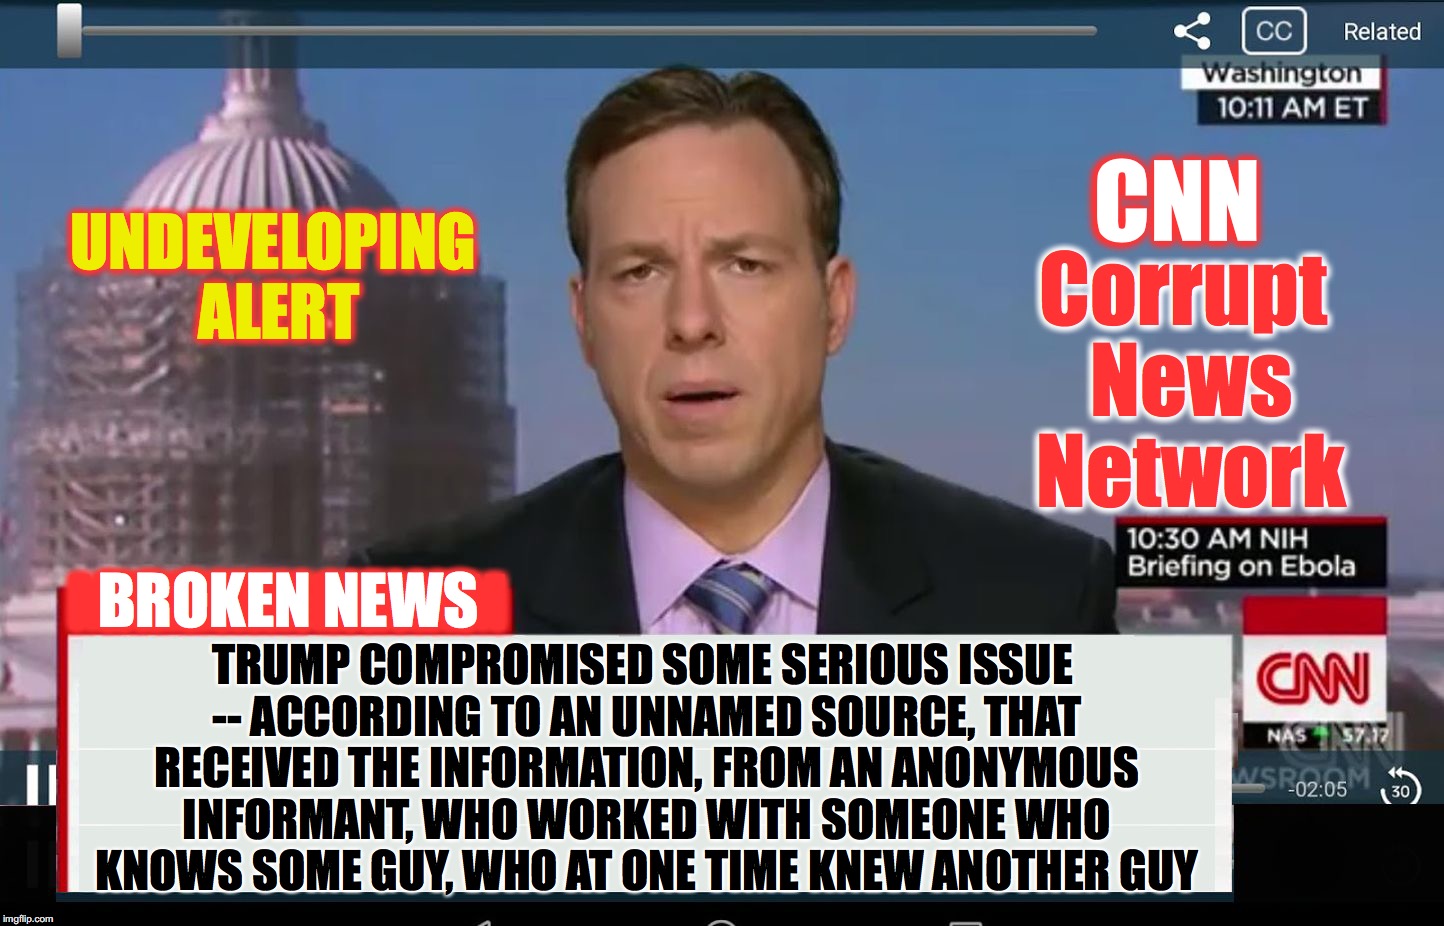 CNN Crazy News Network | CNN; UNDEVELOPING ALERT; Corrupt News Network; BROKEN NEWS; TRUMP COMPROMISED SOME SERIOUS ISSUE -- ACCORDING TO AN UNNAMED SOURCE, THAT RECEIVED THE INFORMATION, FROM AN ANONYMOUS INFORMANT, WHO WORKED WITH SOMEONE WHO KNOWS SOME GUY, WHO AT ONE TIME KNEW ANOTHER GUY; MMMMMMMMM | image tagged in cnn crazy news network | made w/ Imgflip meme maker